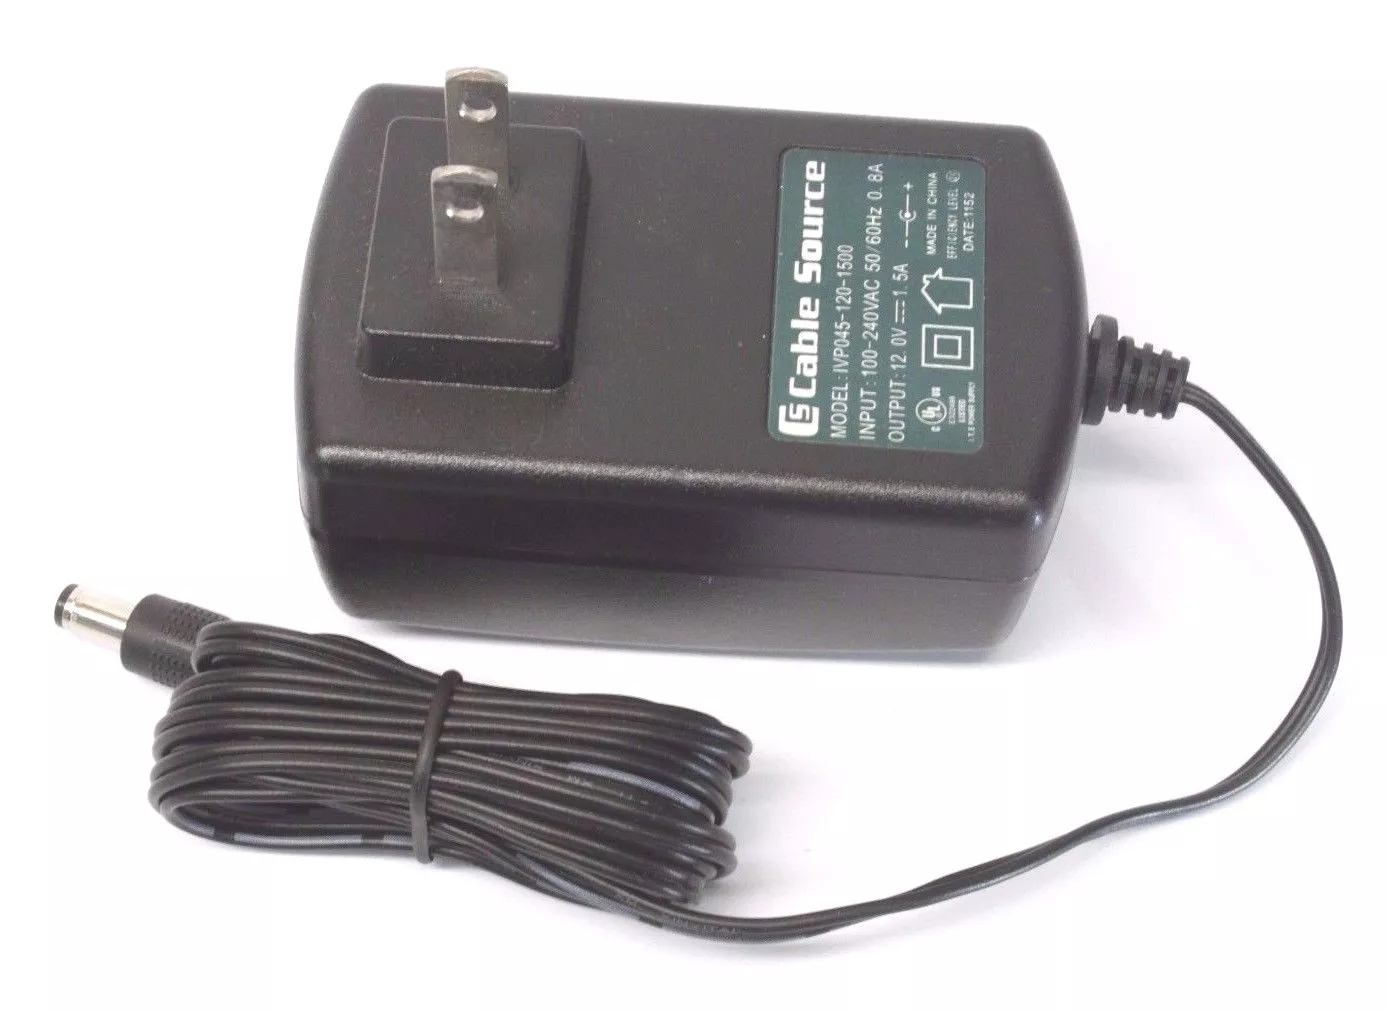 *Brand NEW*Cable Source IVP045-120-1500 Output 12V 1.5A AC DC Adapter Charger Power Supply